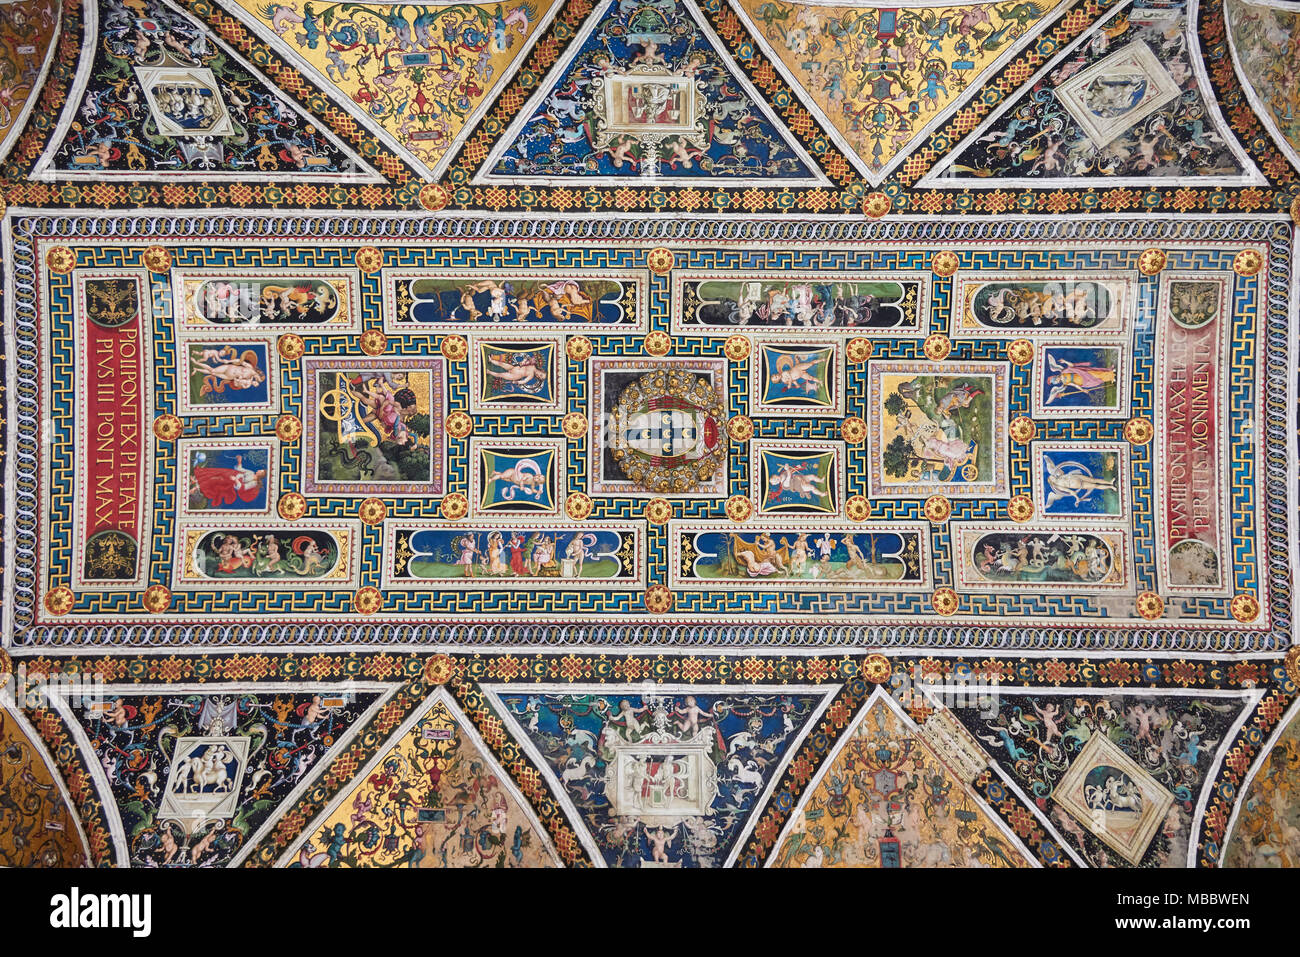 Siena, Italy - Febuary 16, 2016: Ceilling of Piccolomini Library  in Duomo di Siena, housing precious illuminated choir books and frescoes painted by  Stock Photo